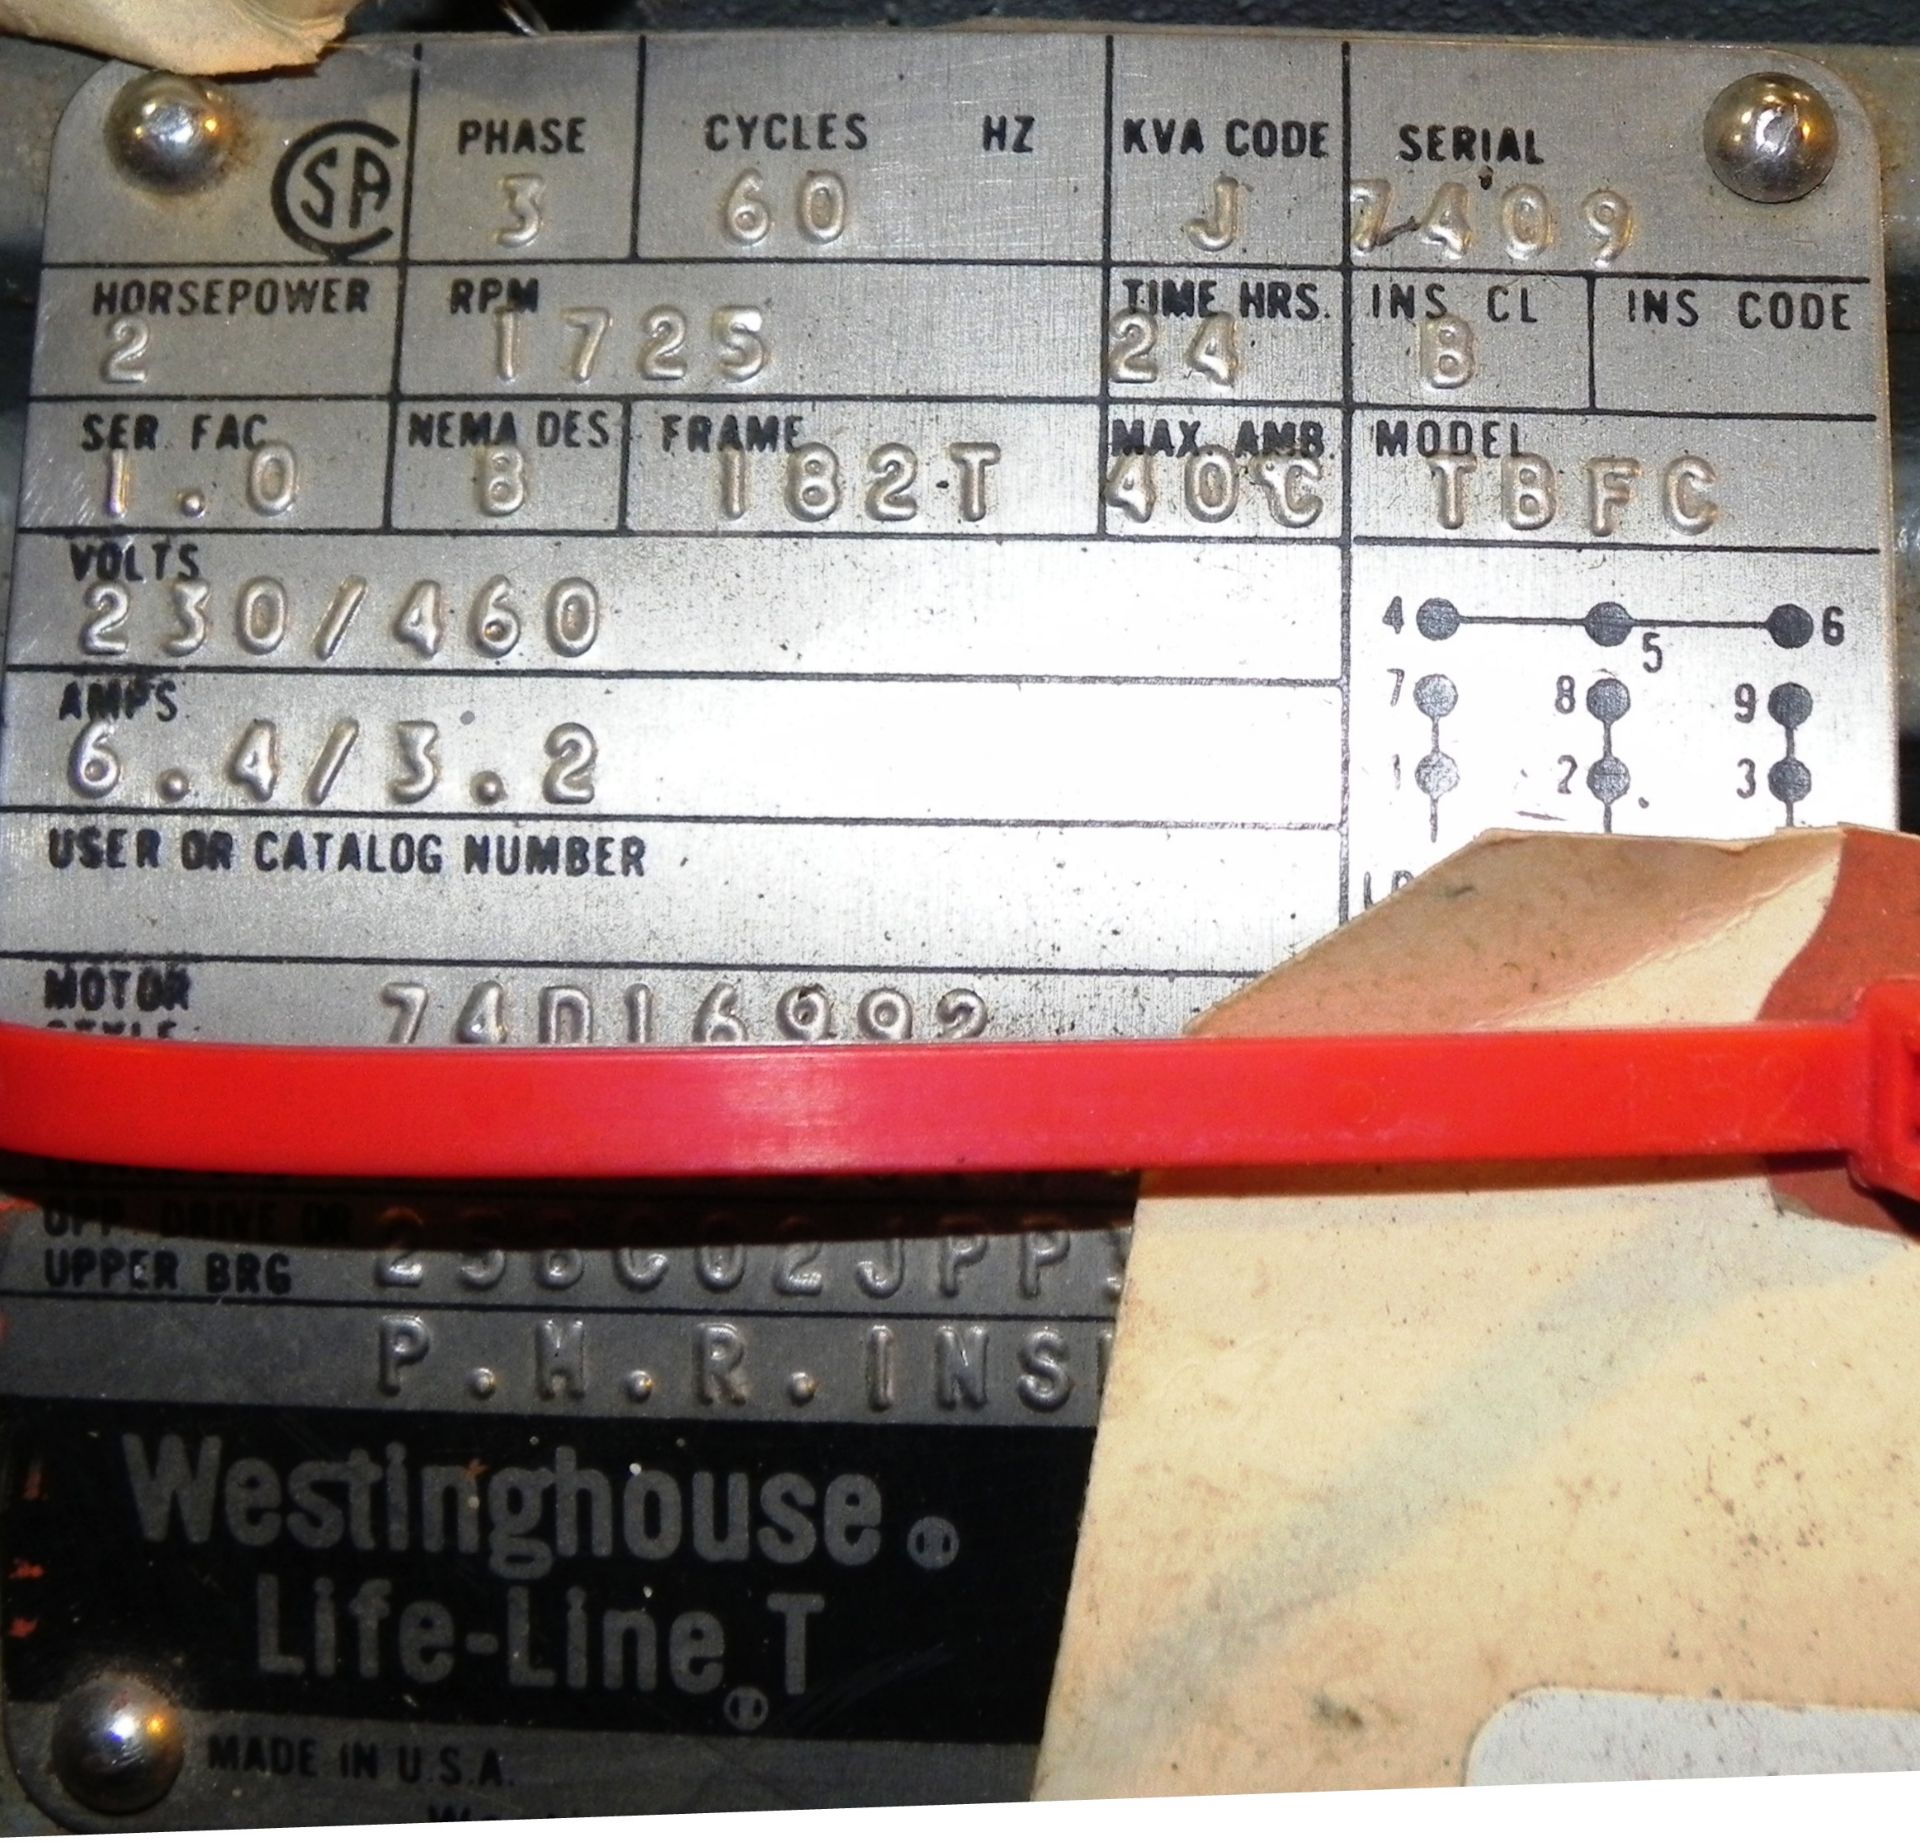 Westinghouse 2 HP Life-Line T 1725 RPM Motor TBFC - Image 3 of 5